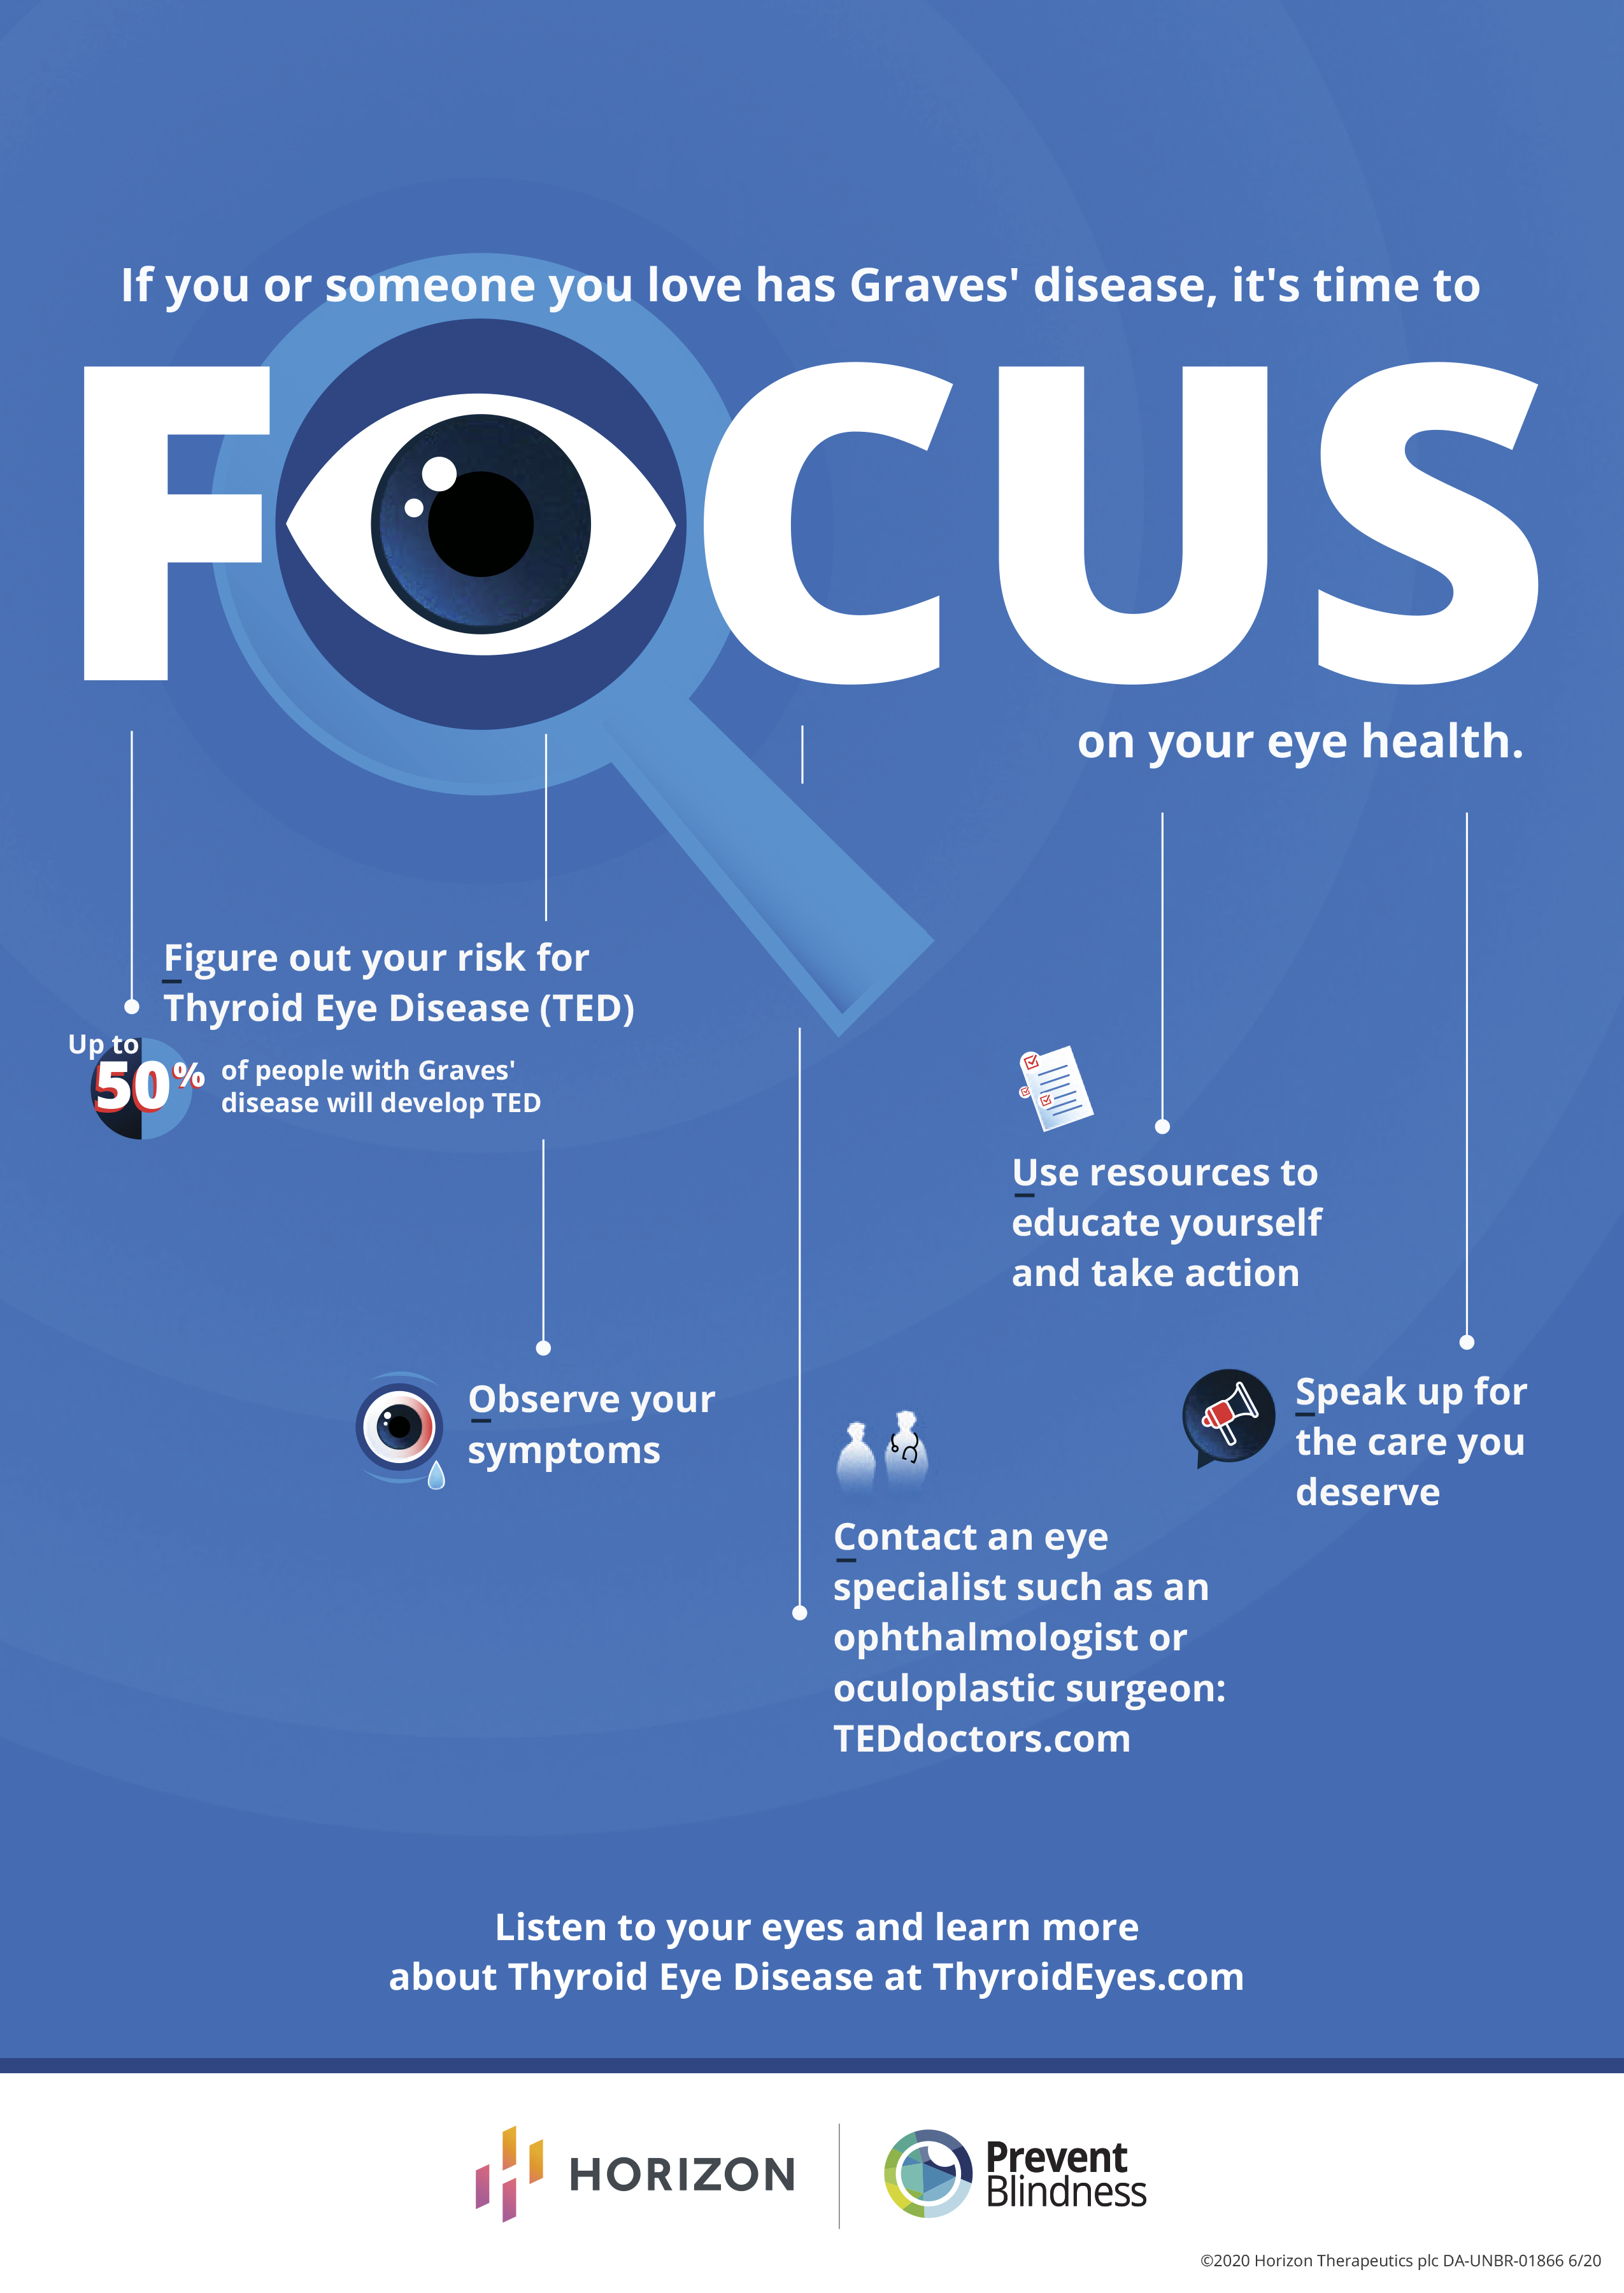 Why The Graves Disease Community Should Focus On Eye